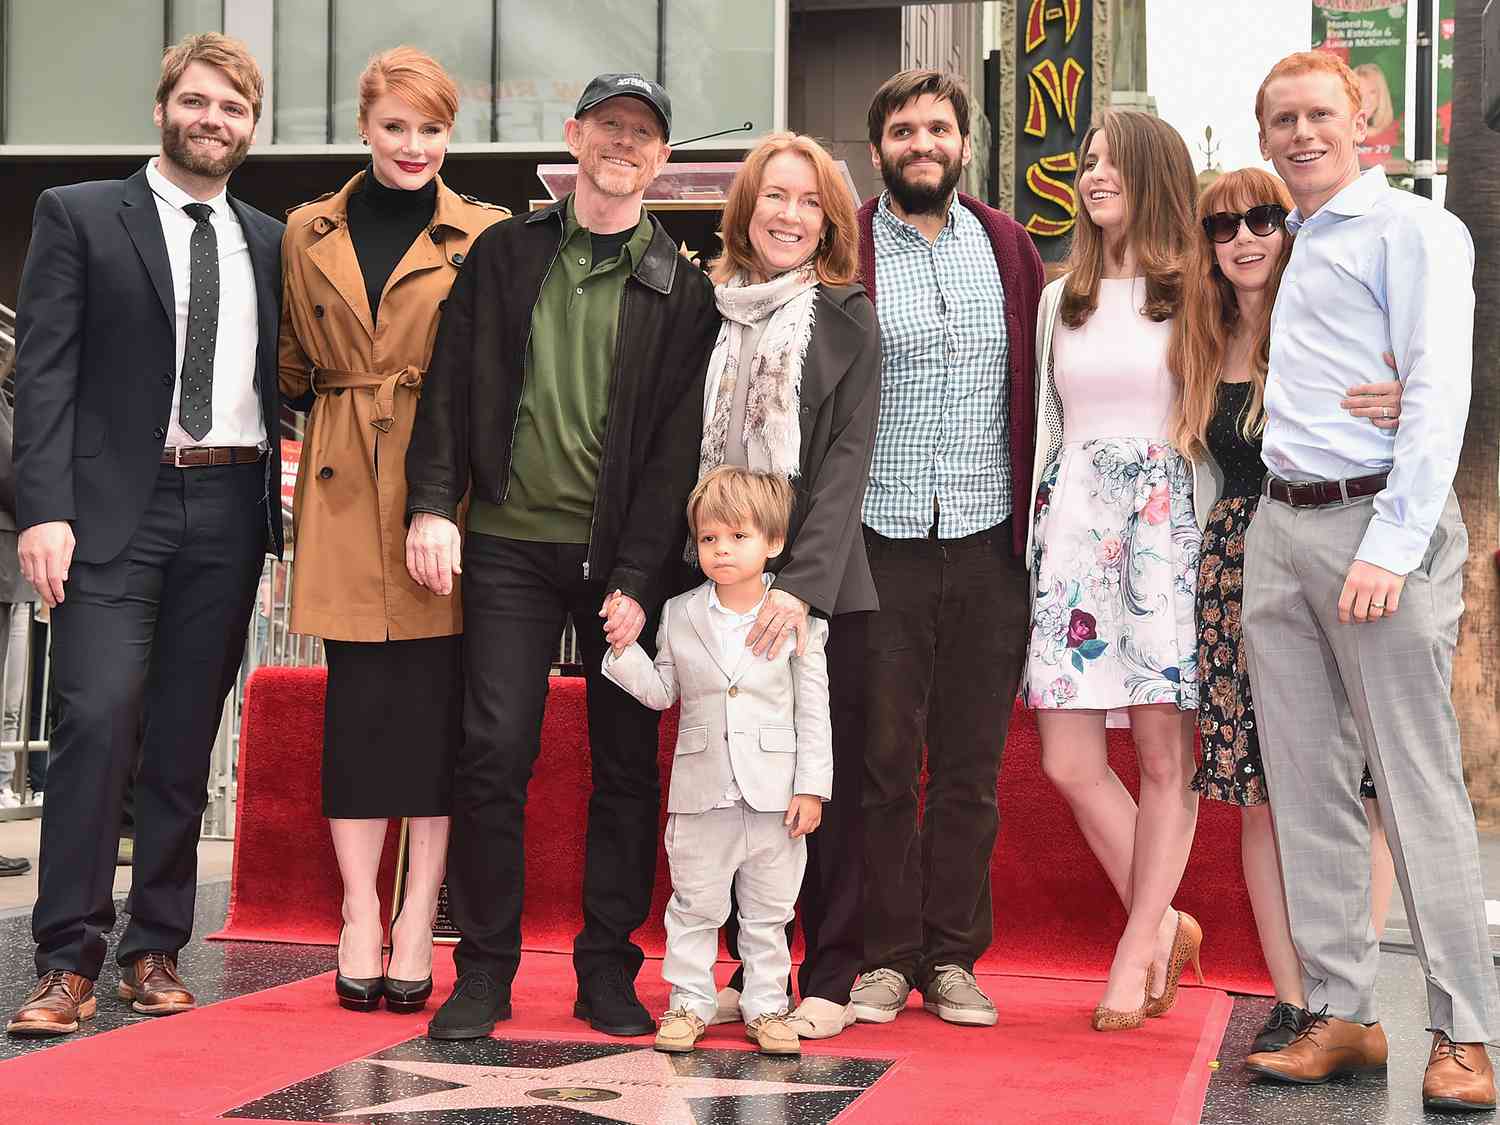 Bryce Dallas Howard Siblings: Who Are They?